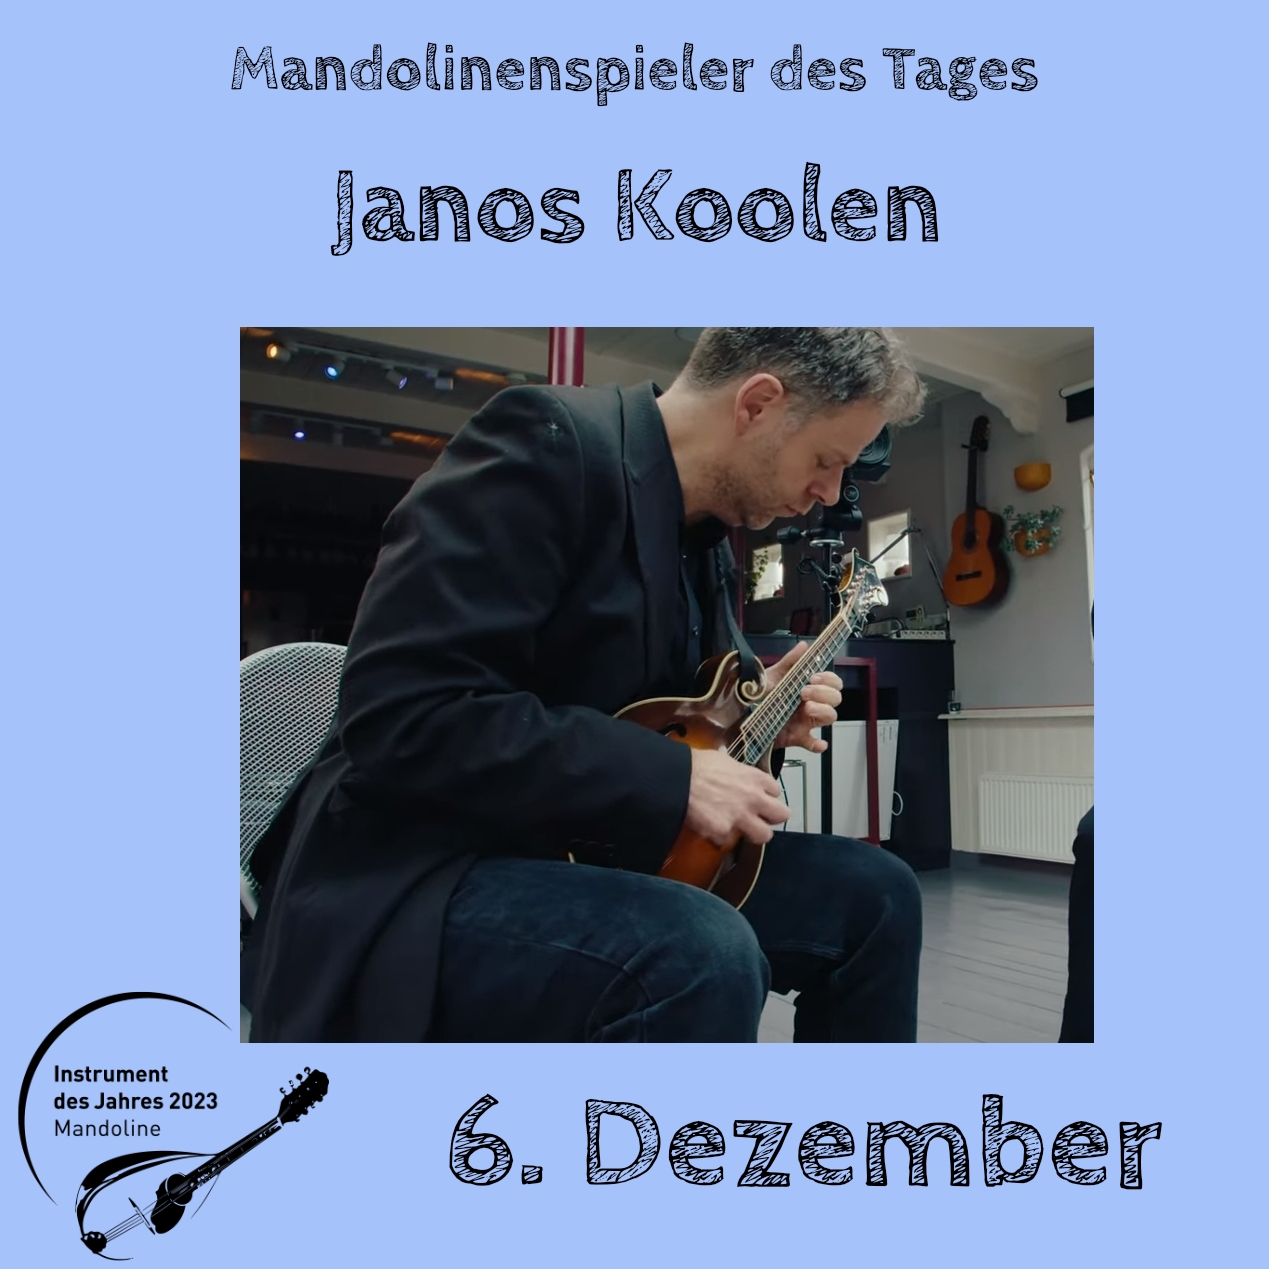 You are currently viewing 6. Dezember – Janos Koolen